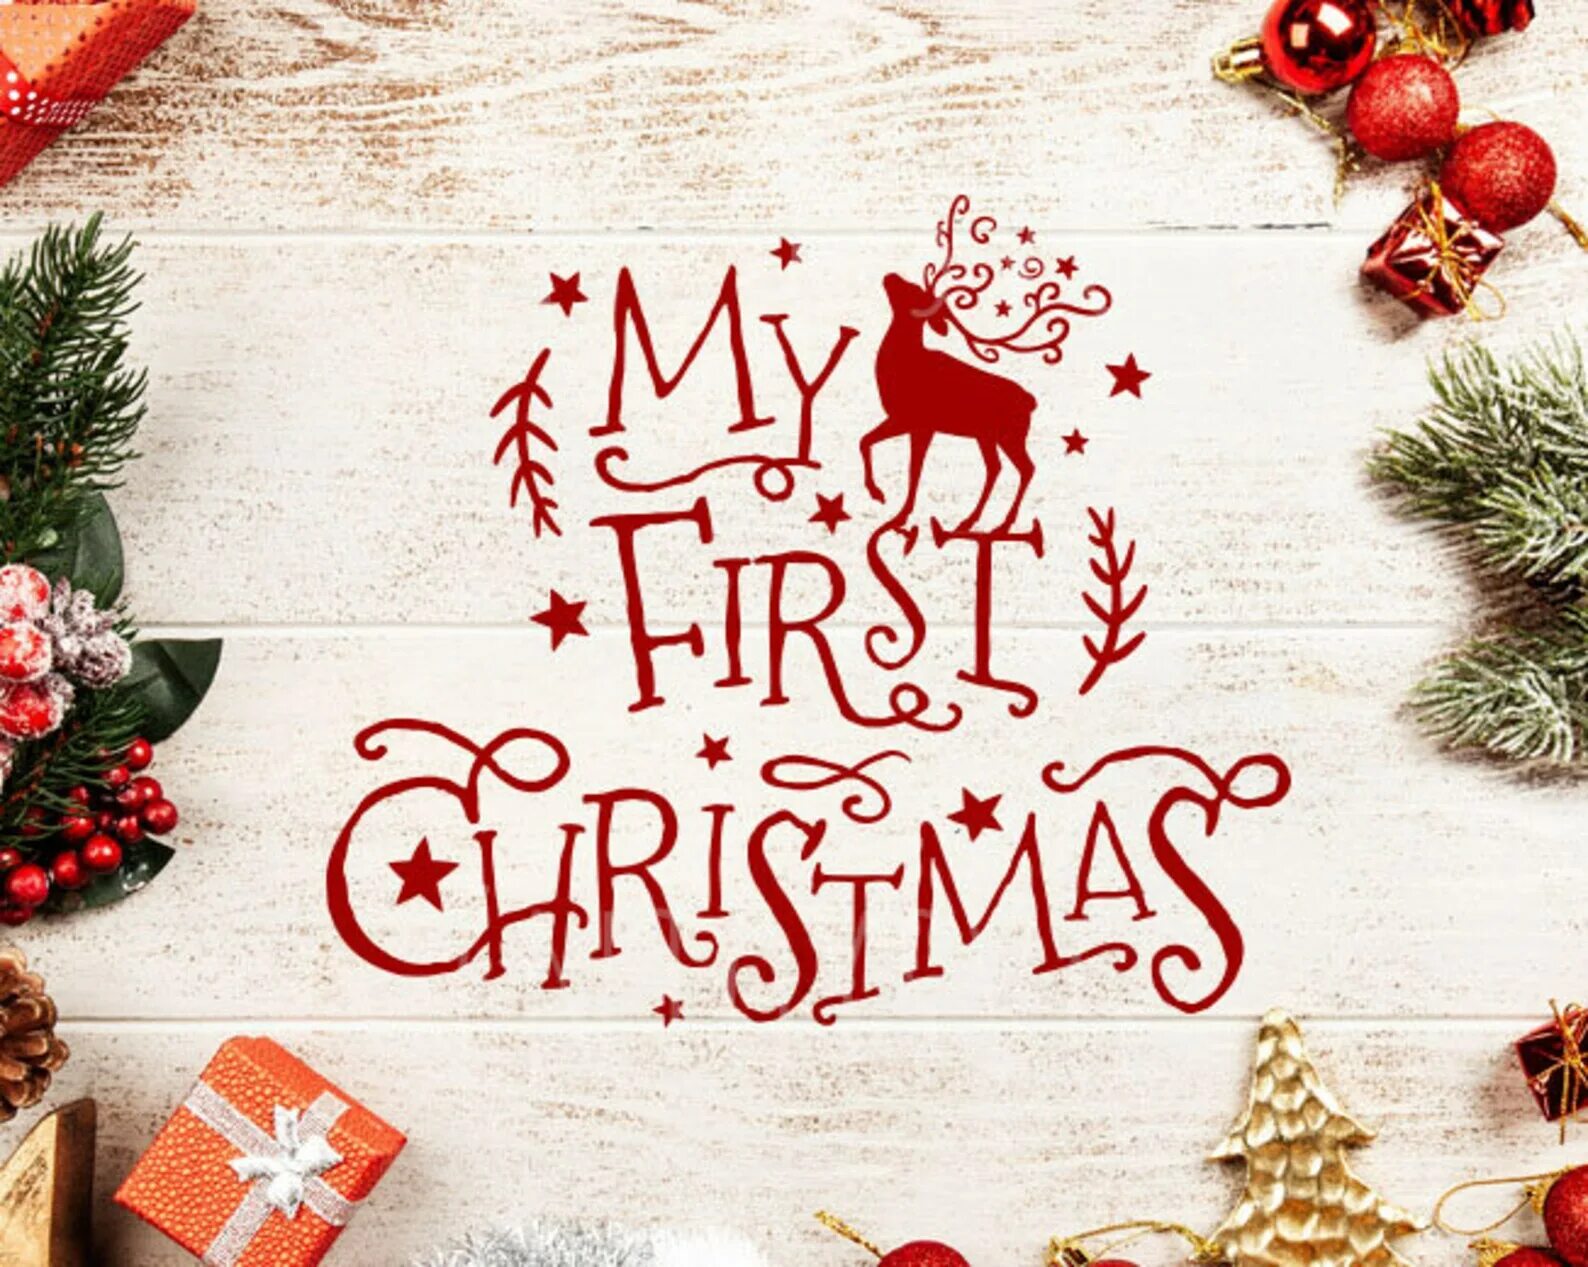 Christmas firsts